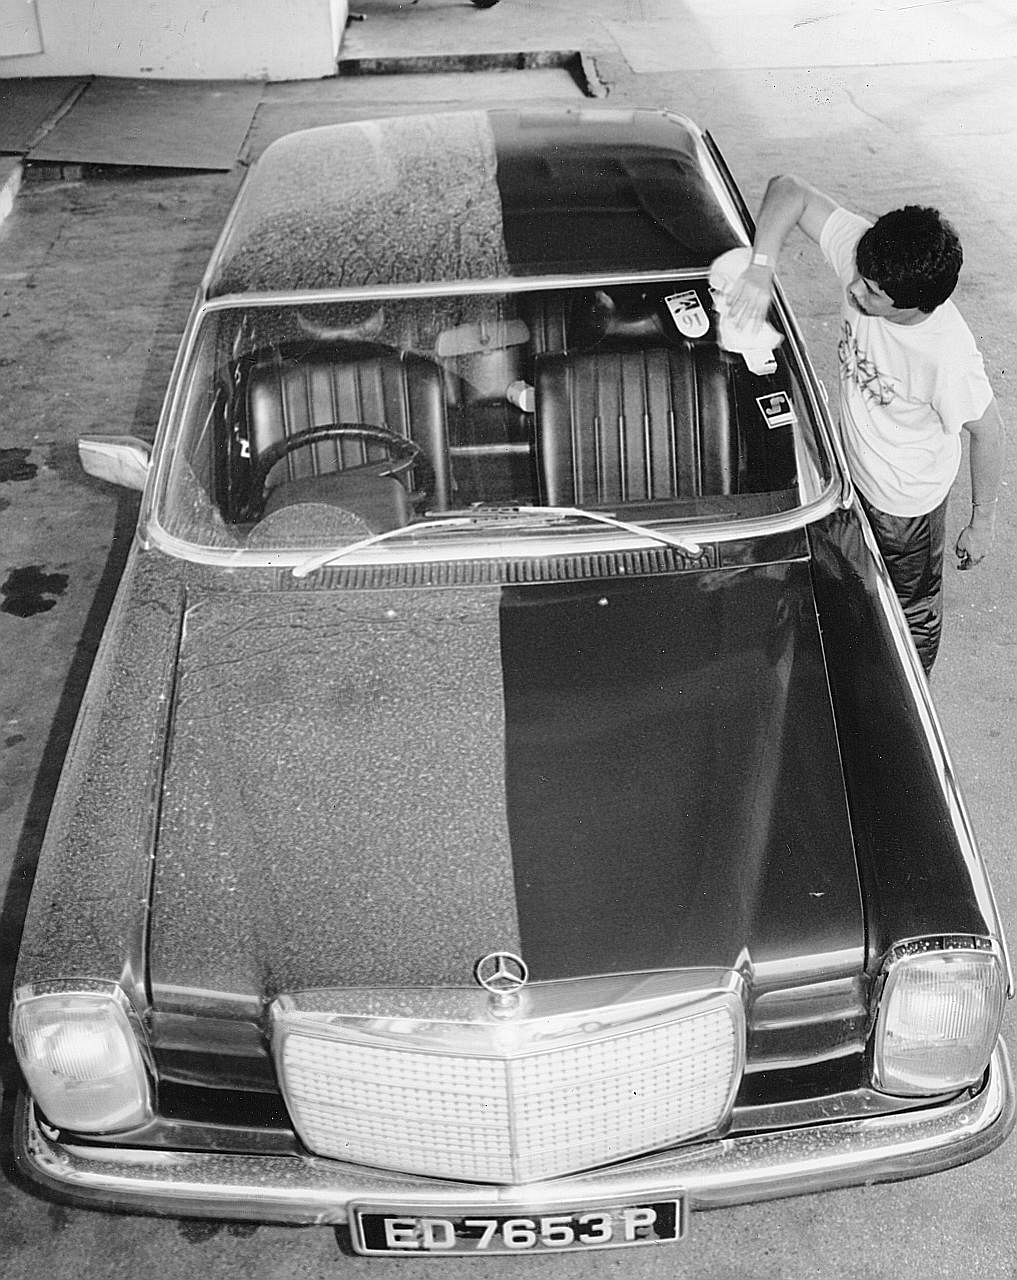 Car owners in Singapore wiping down their vehicles on June 17 and 18, 1991, after ash from the eruption of Mount Pinatubo in the Philippines was blown more than 2,400km to the Republic by high winds.